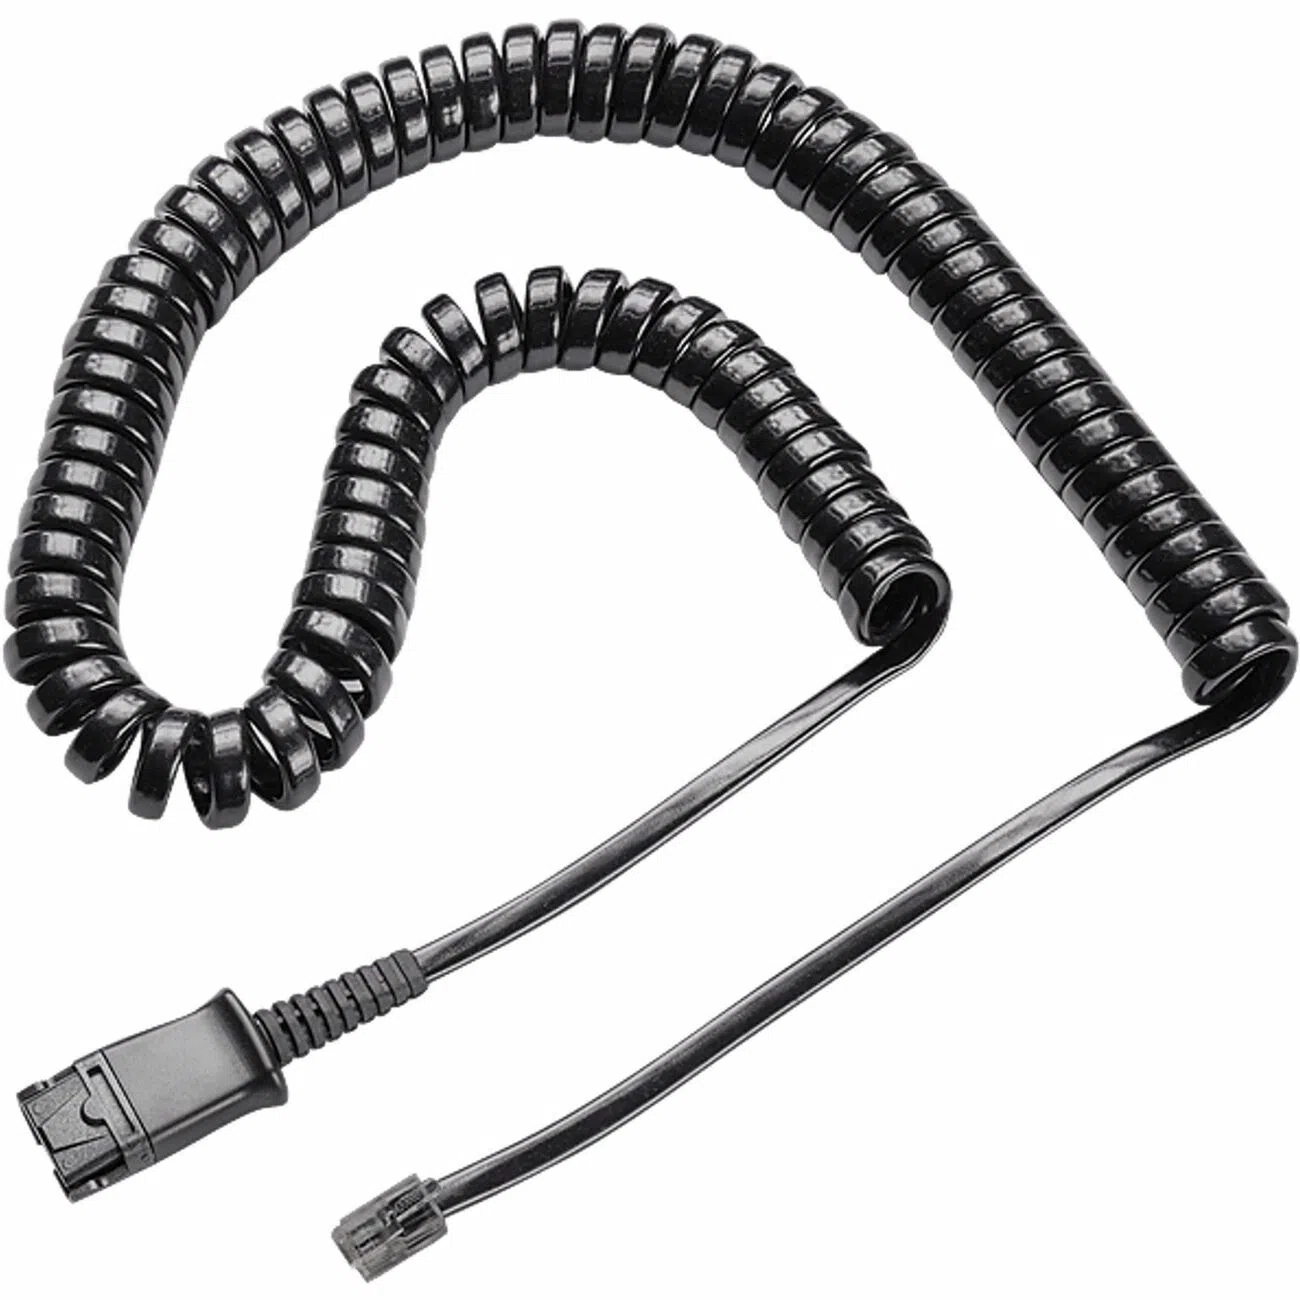 Does the 85R38AA Poly M12 Cable work compatibly with my device?